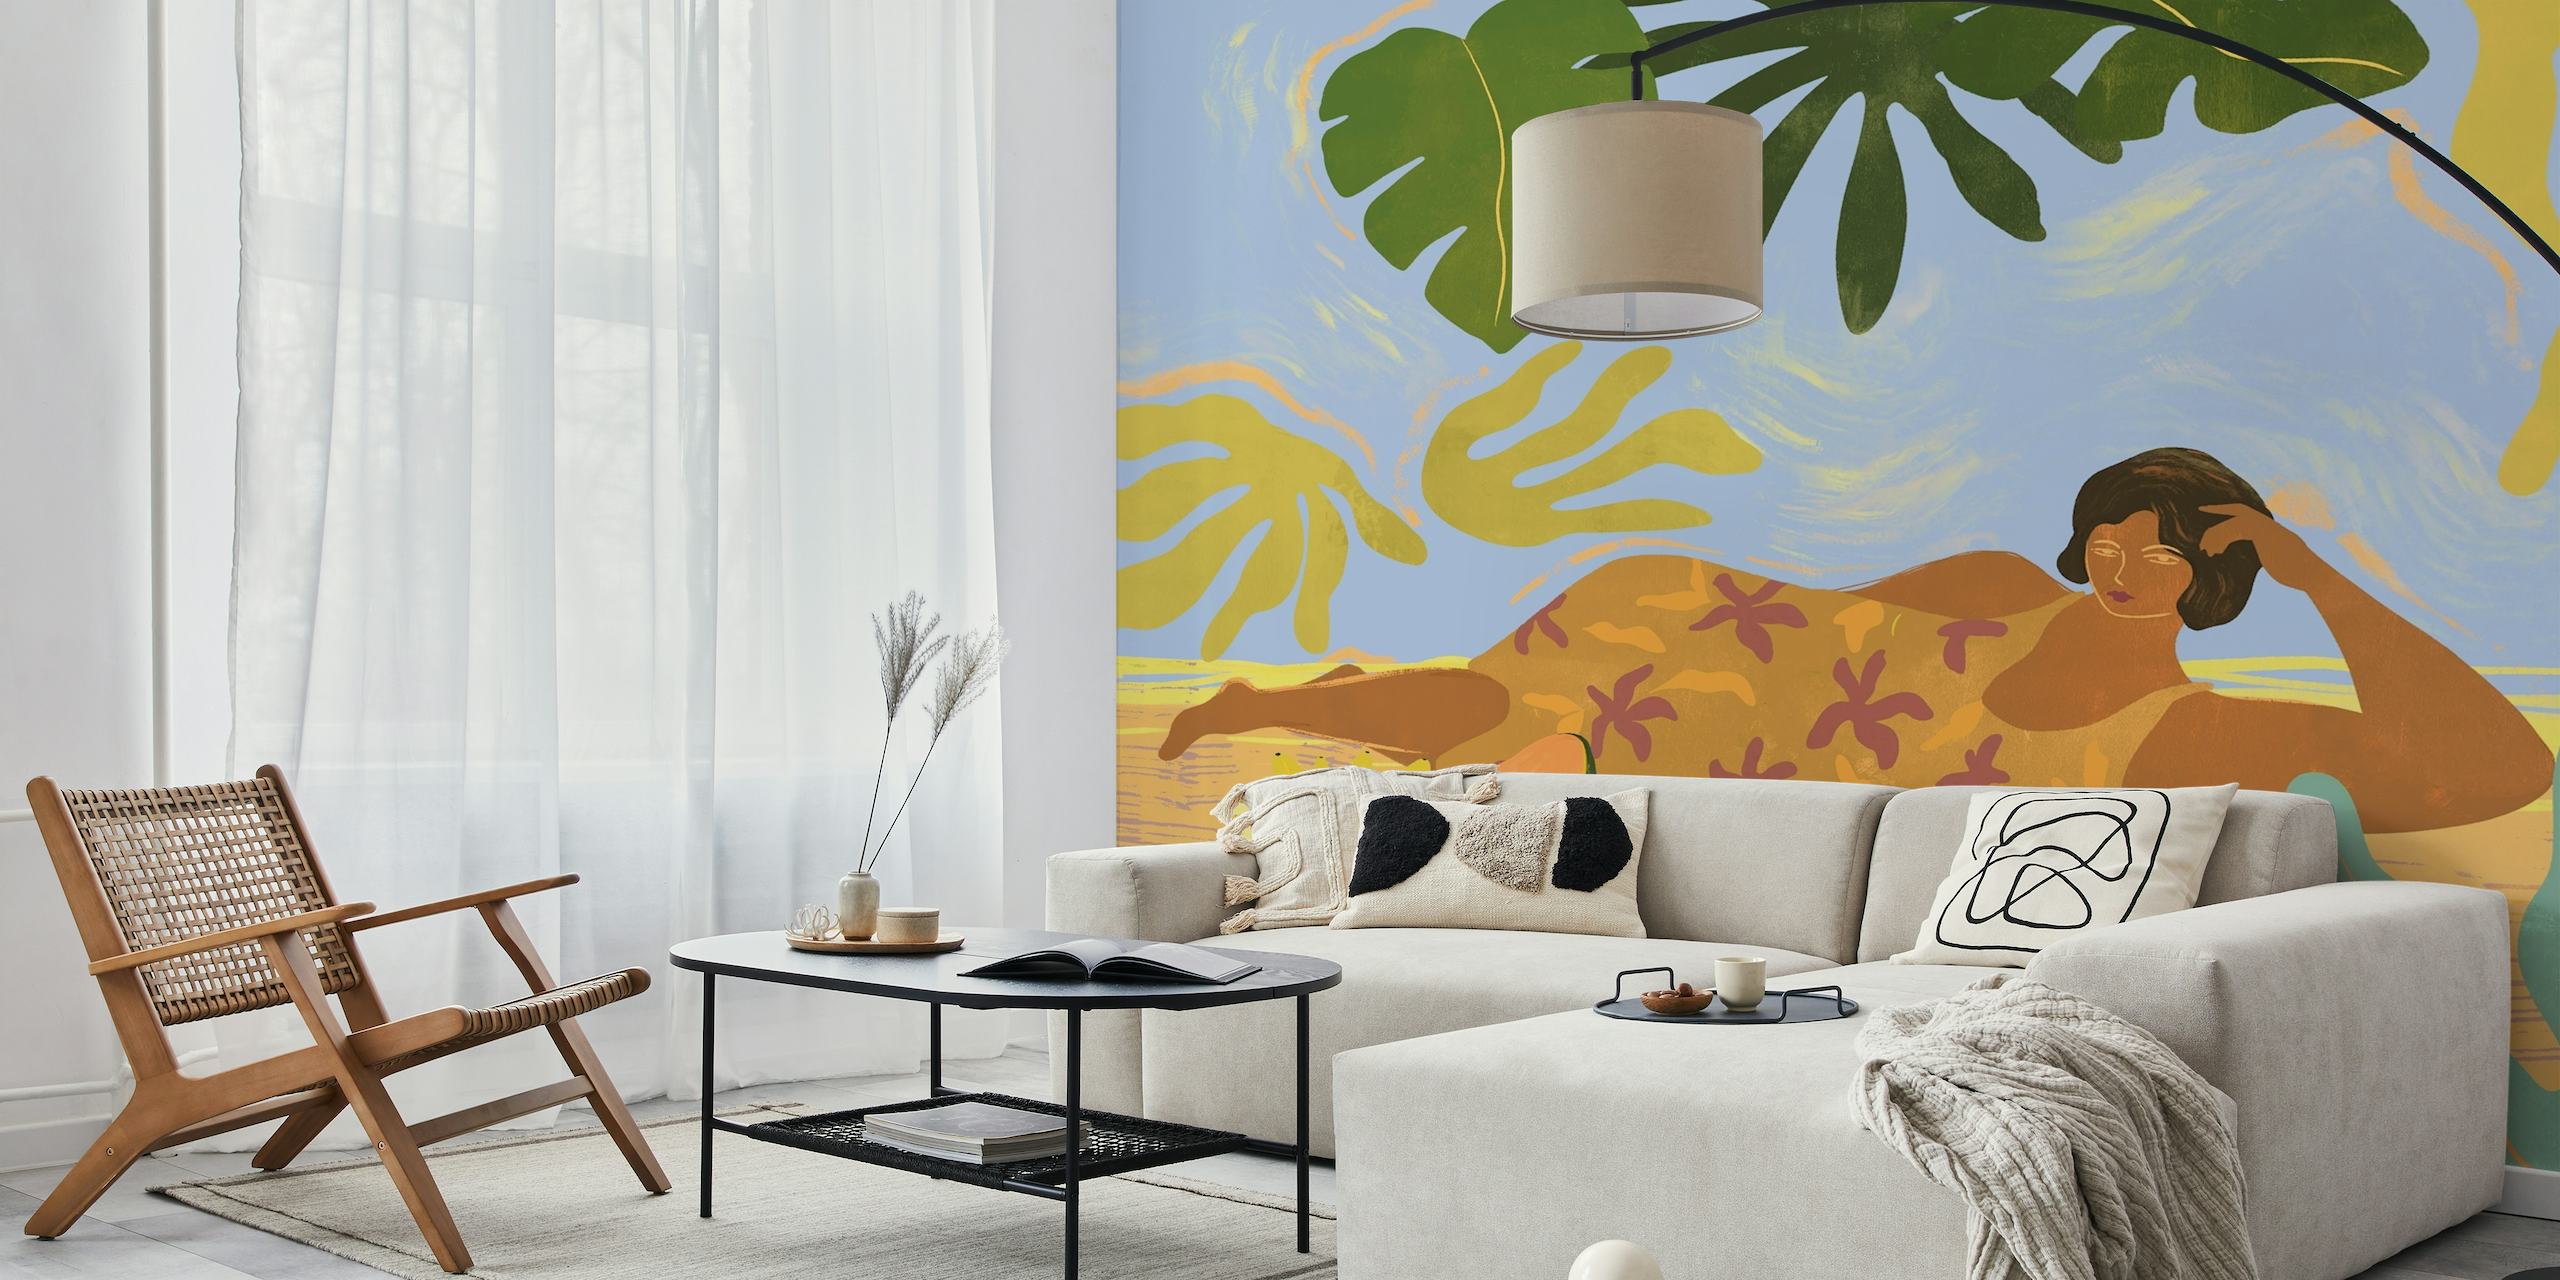 Wall mural of a person relaxing surrounded by tropical plants and abstract shapes